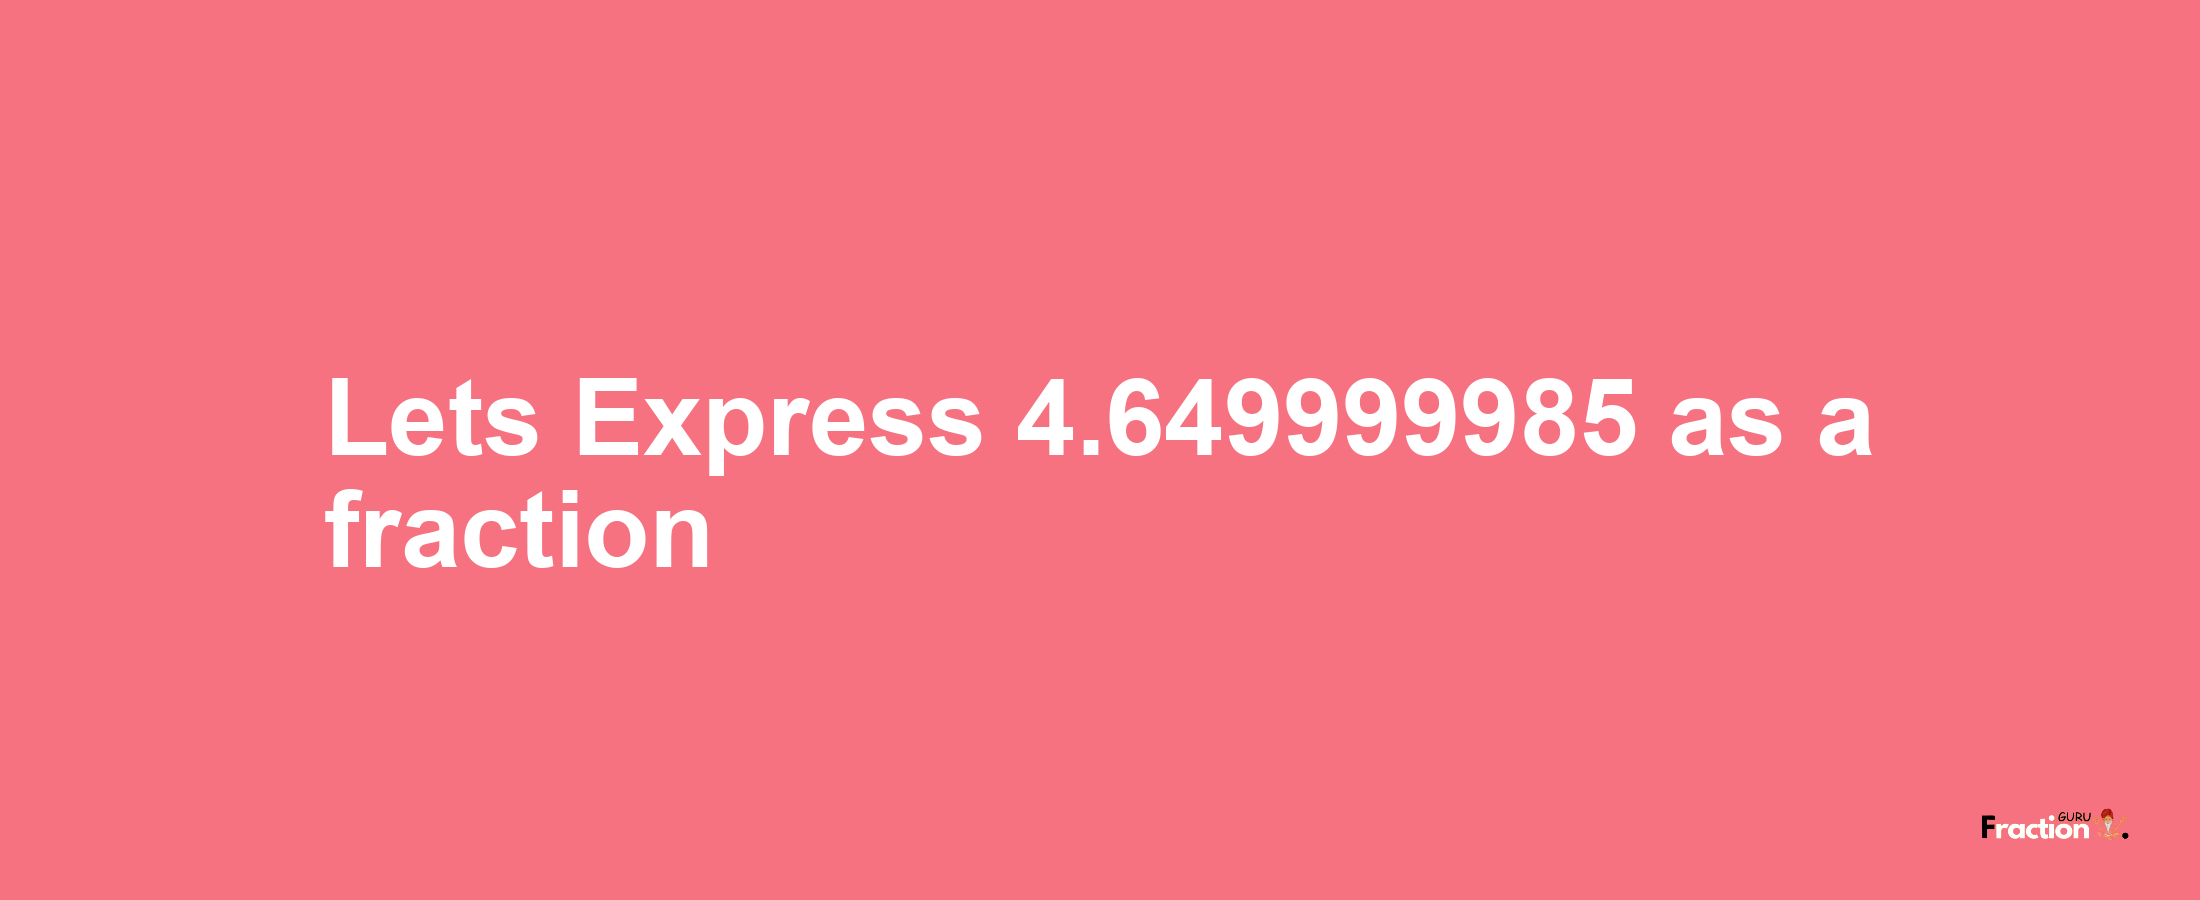 Lets Express 4.649999985 as afraction